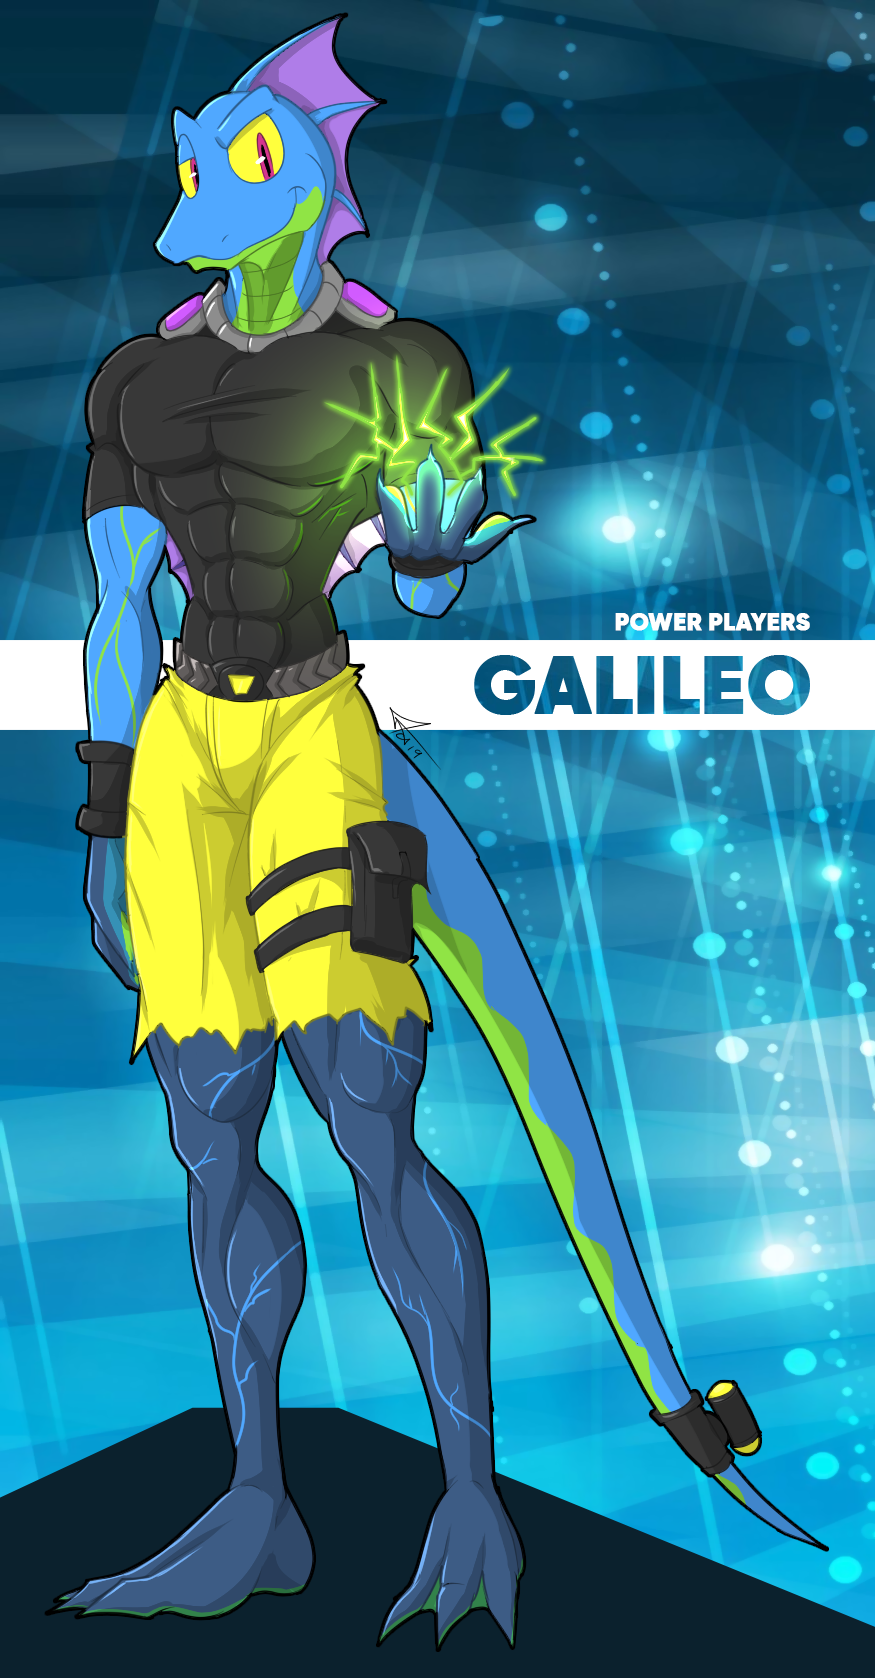 Power Players' Galileo by McTaylis on DeviantArt